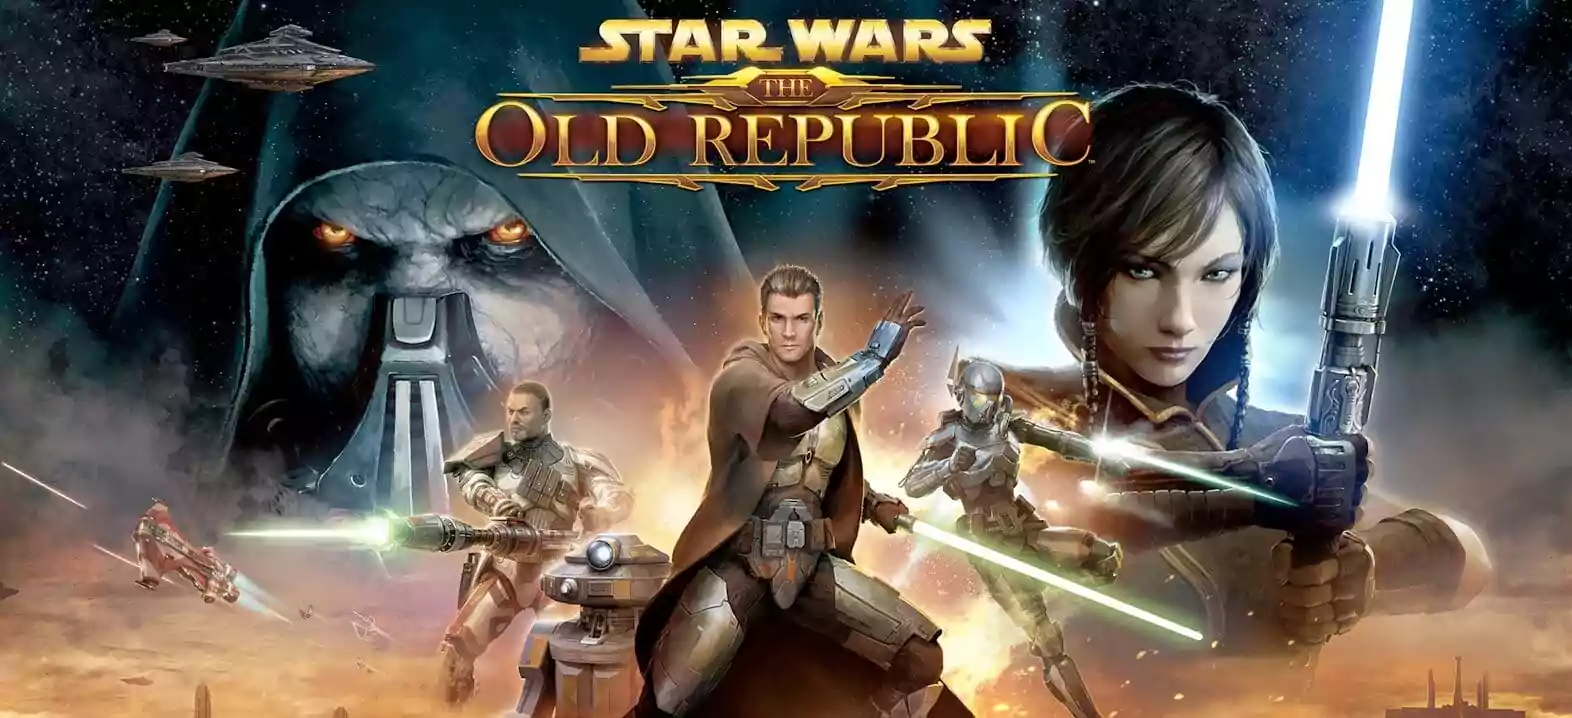 Star Wars: The Old Republican Is Now Available On Stream